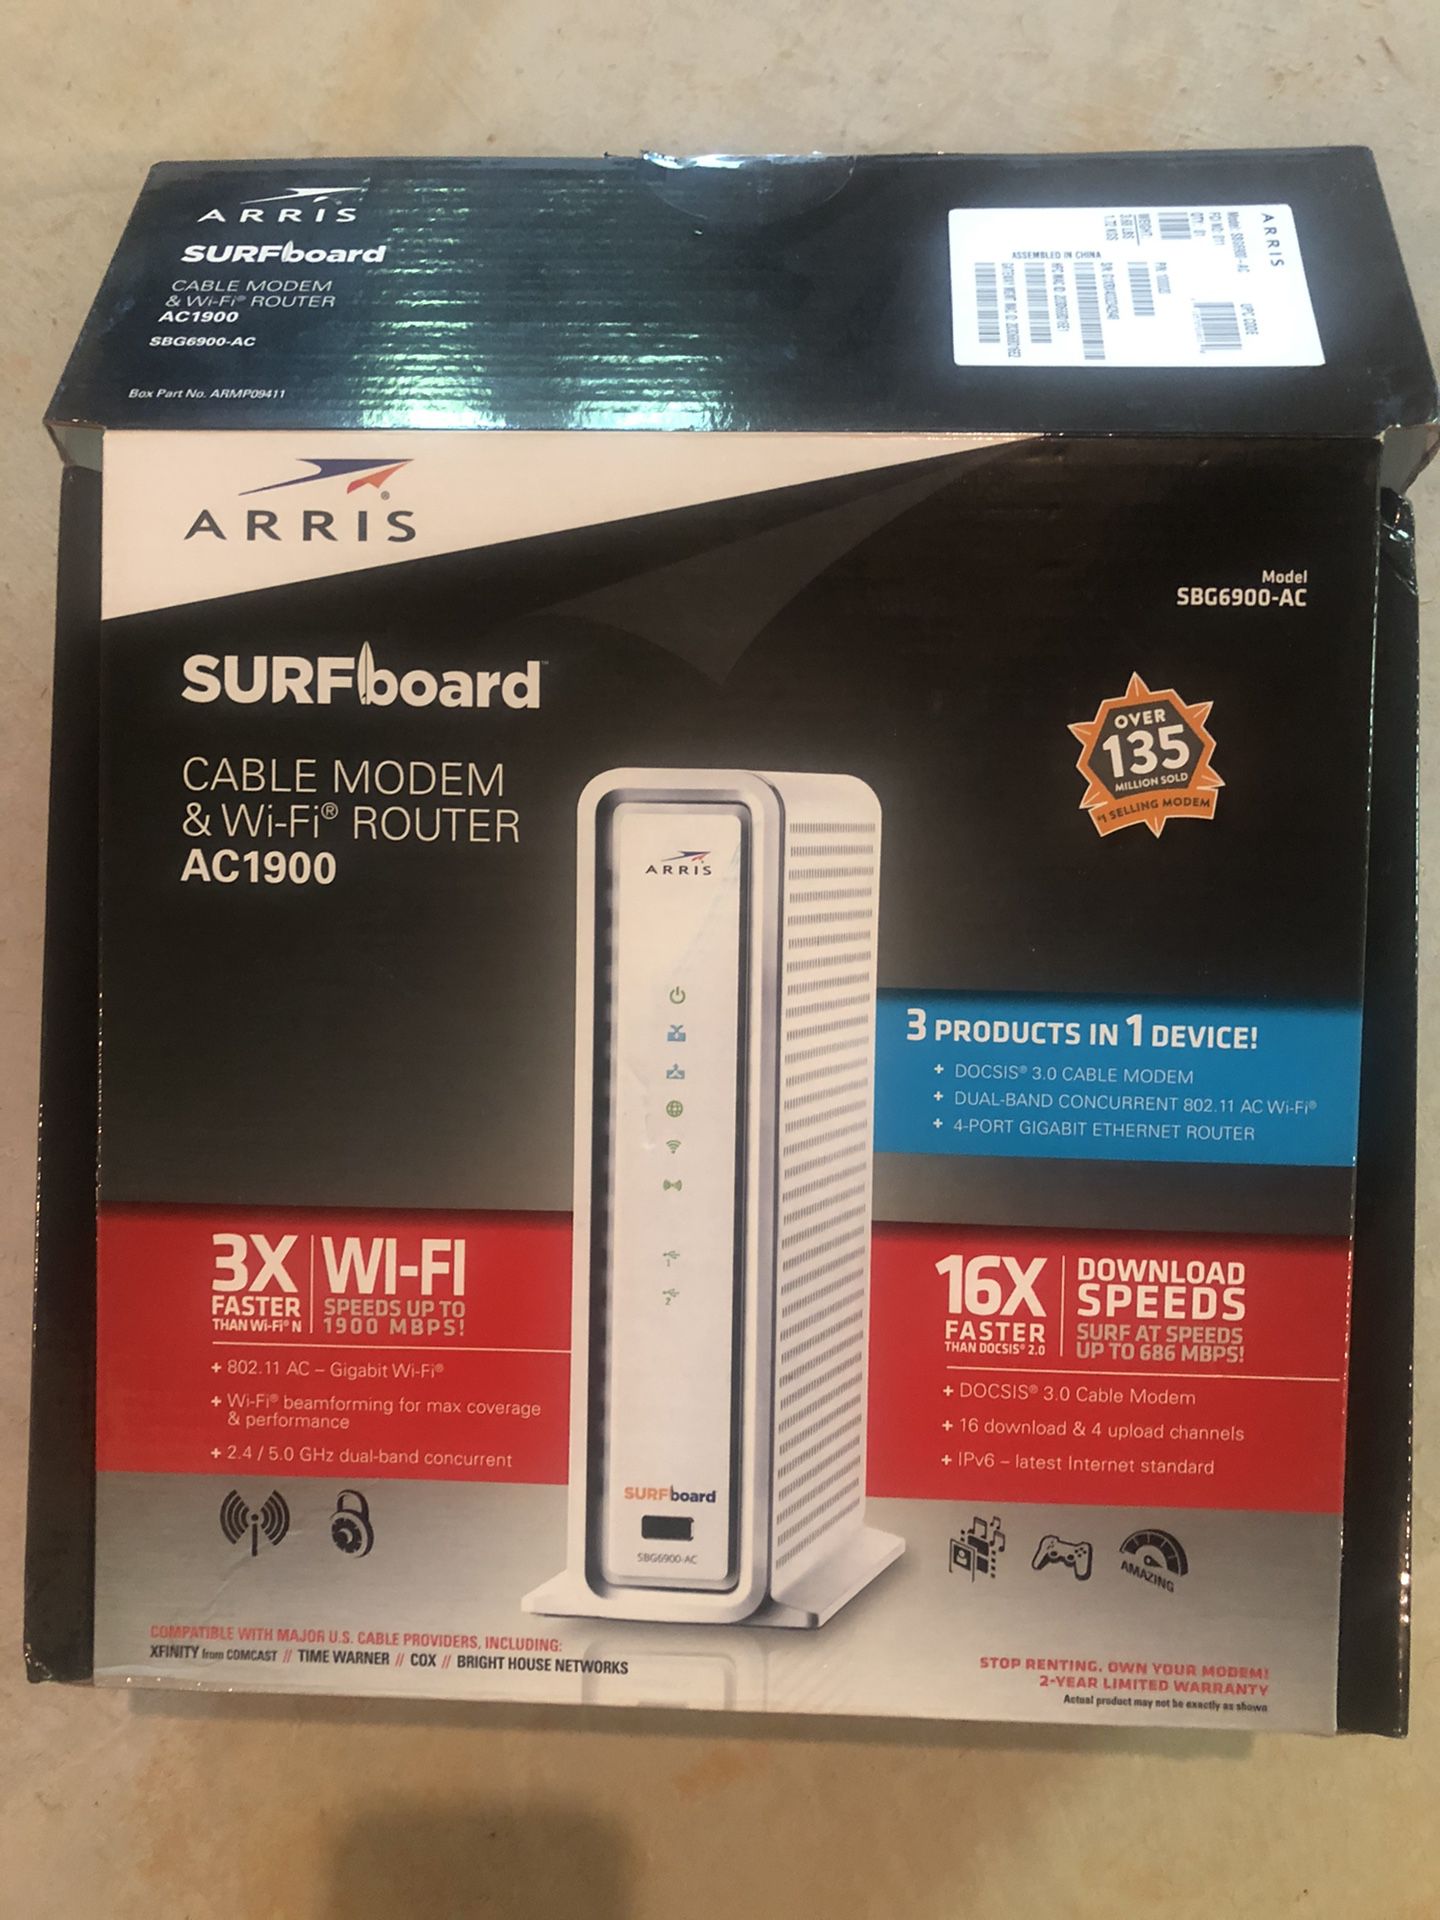 Surfboard Cable Modem and WiFi Router AC1900-SBG6900